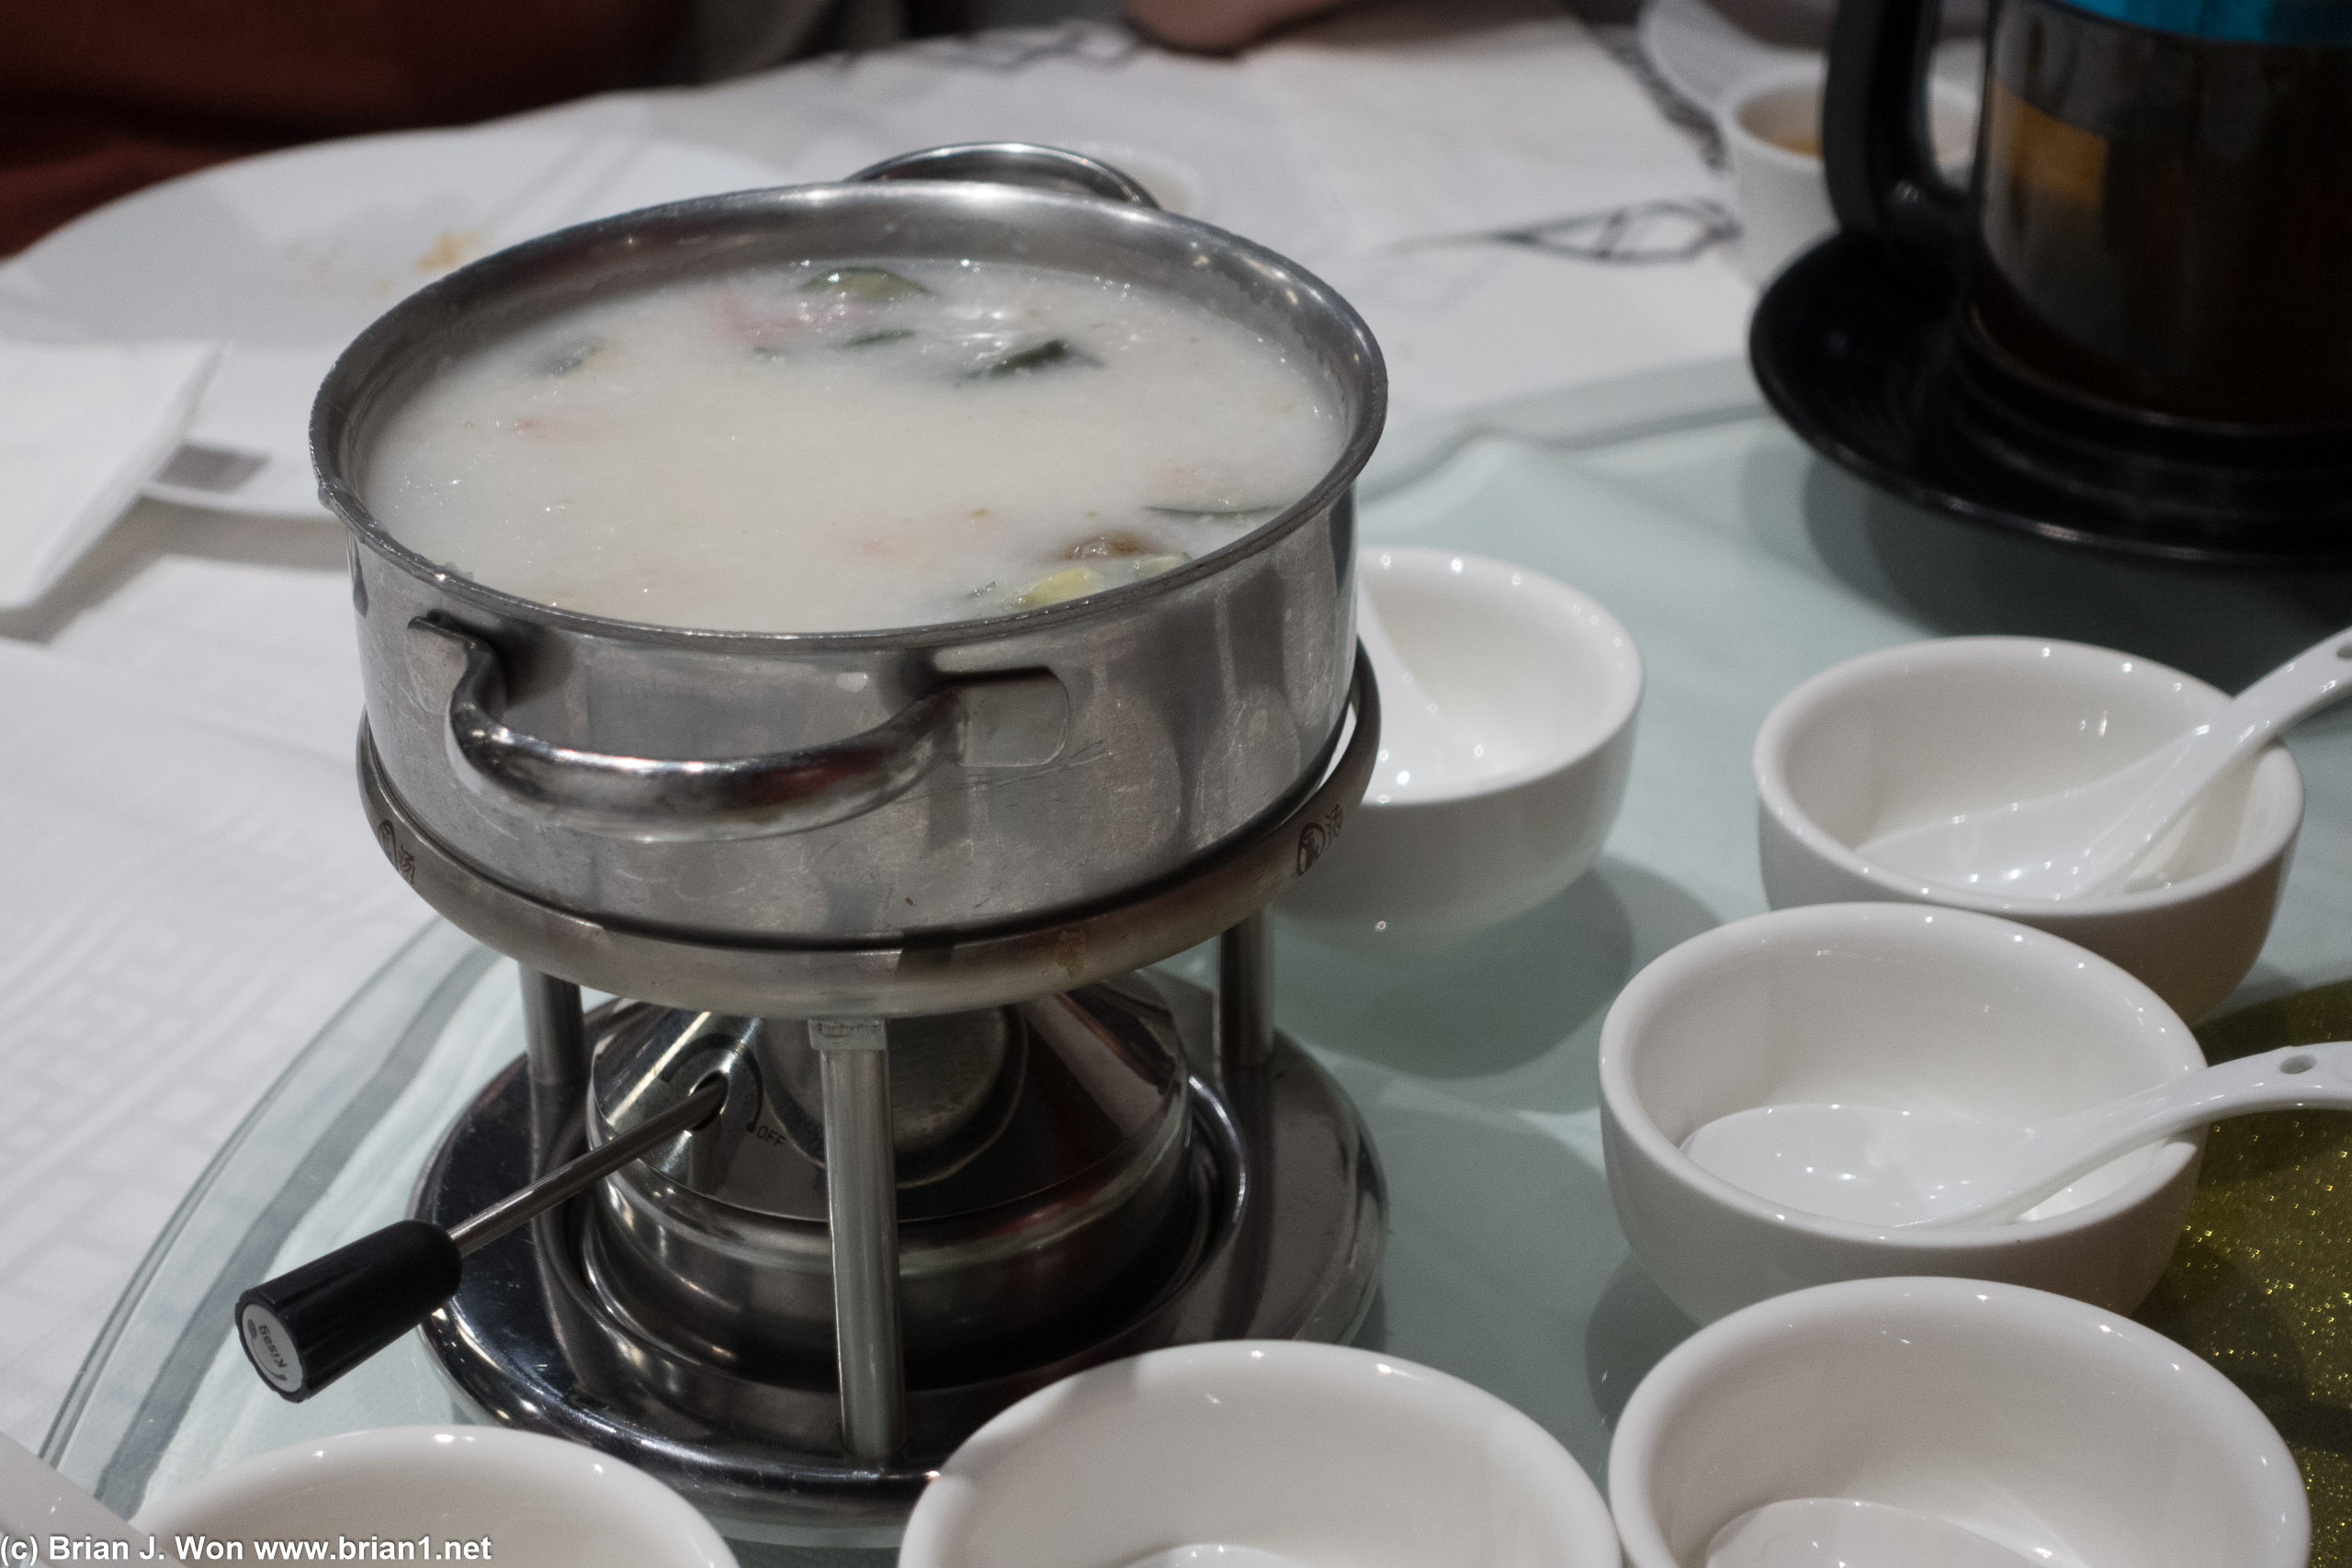 Pei dan sau yuk jook was pretty good, but the burner was totally unnecessary as the pot was empty after serving the table.